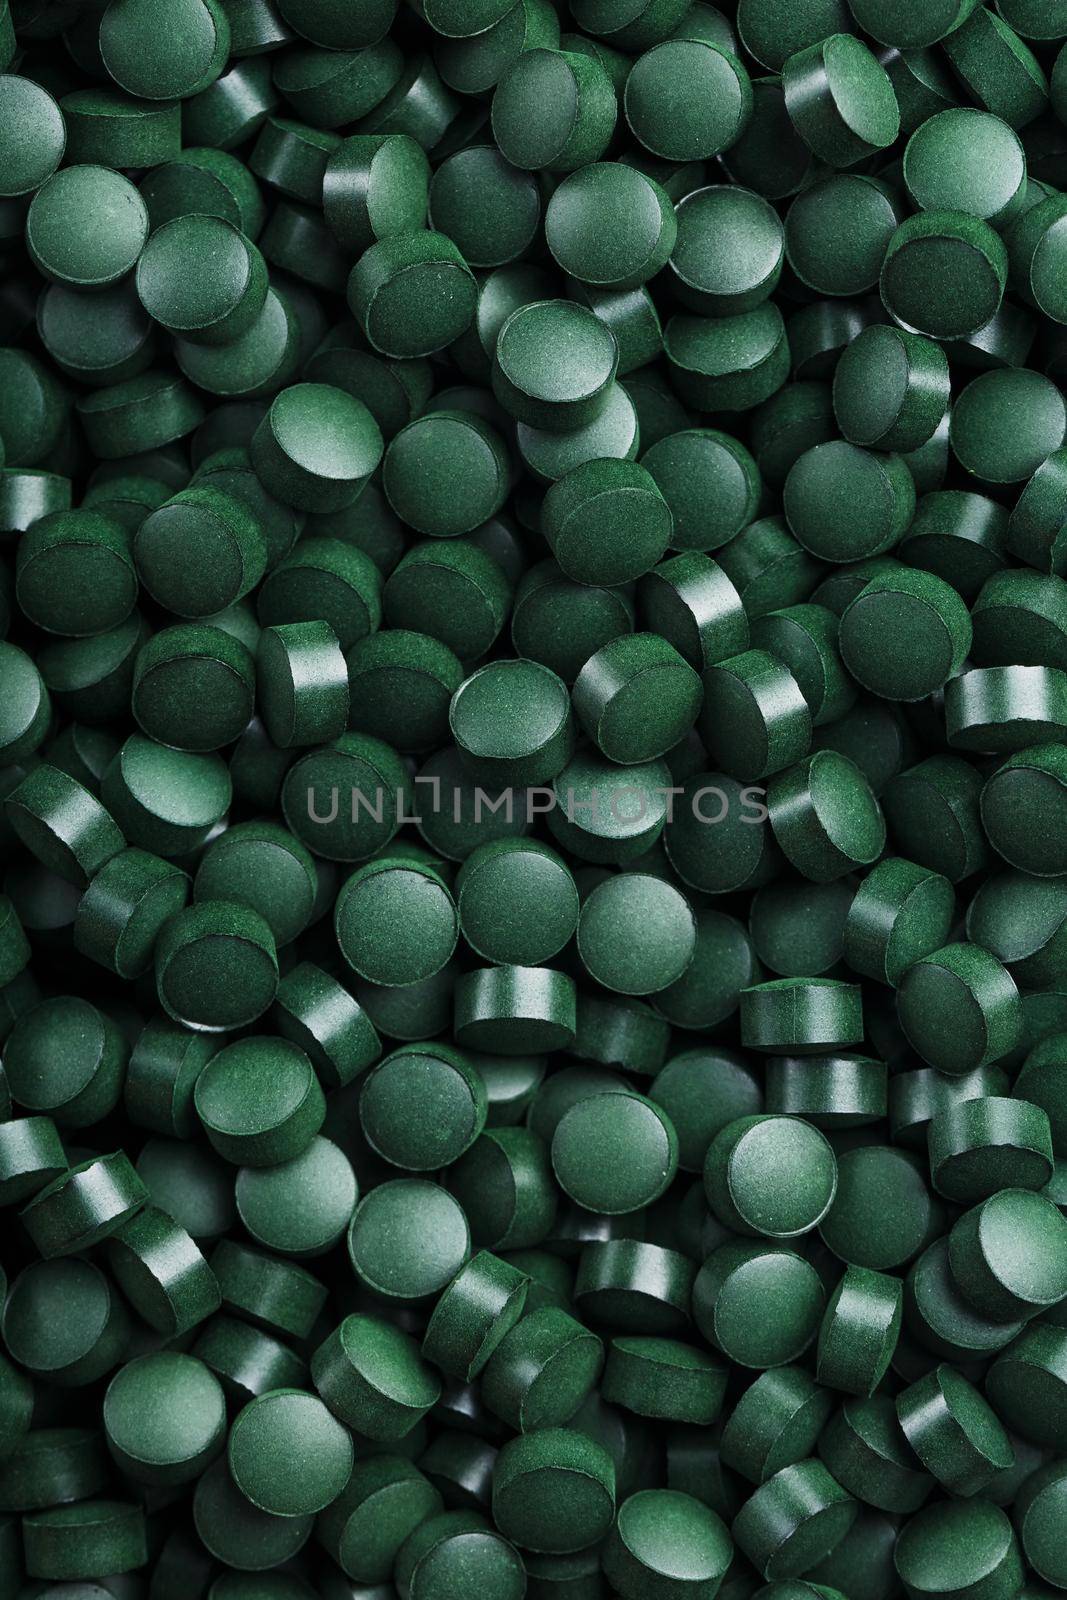 Green tablets from spirulina vegetarian dietary supplement by AlexGrec